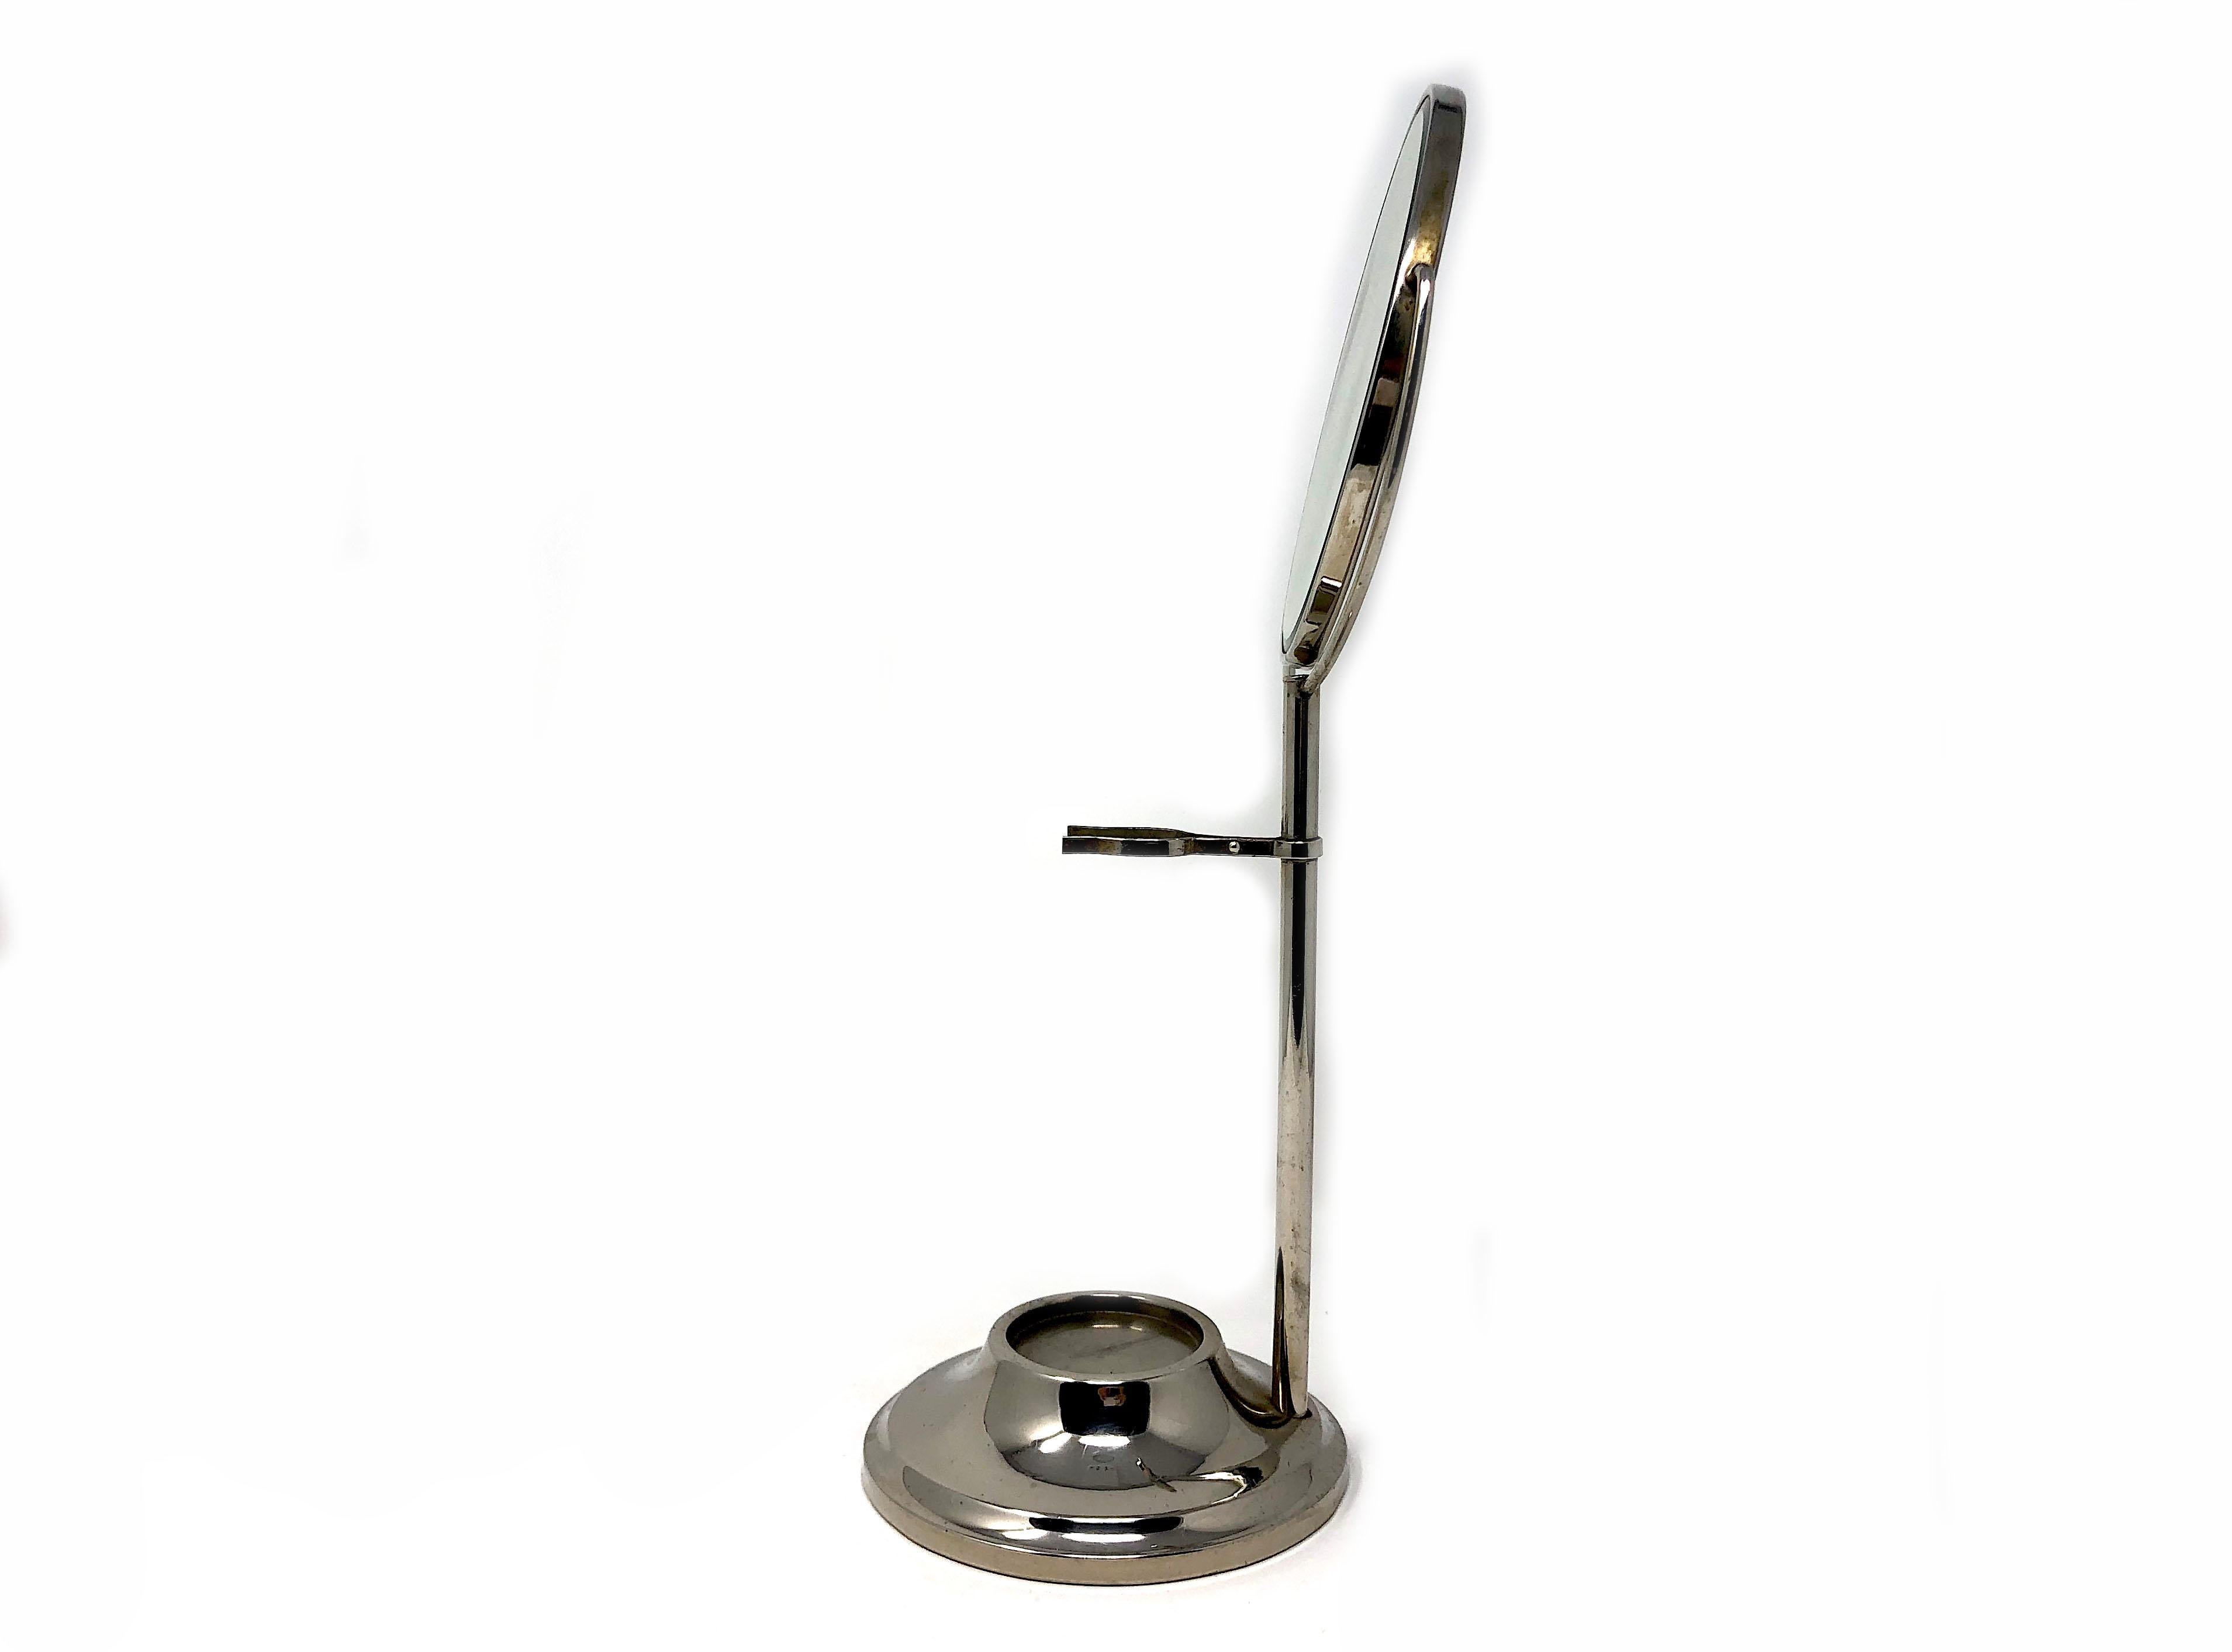 Plated Antique Art Deco Chrome Silver Pedestal Shaving Mirror on Stand with Holder For Sale